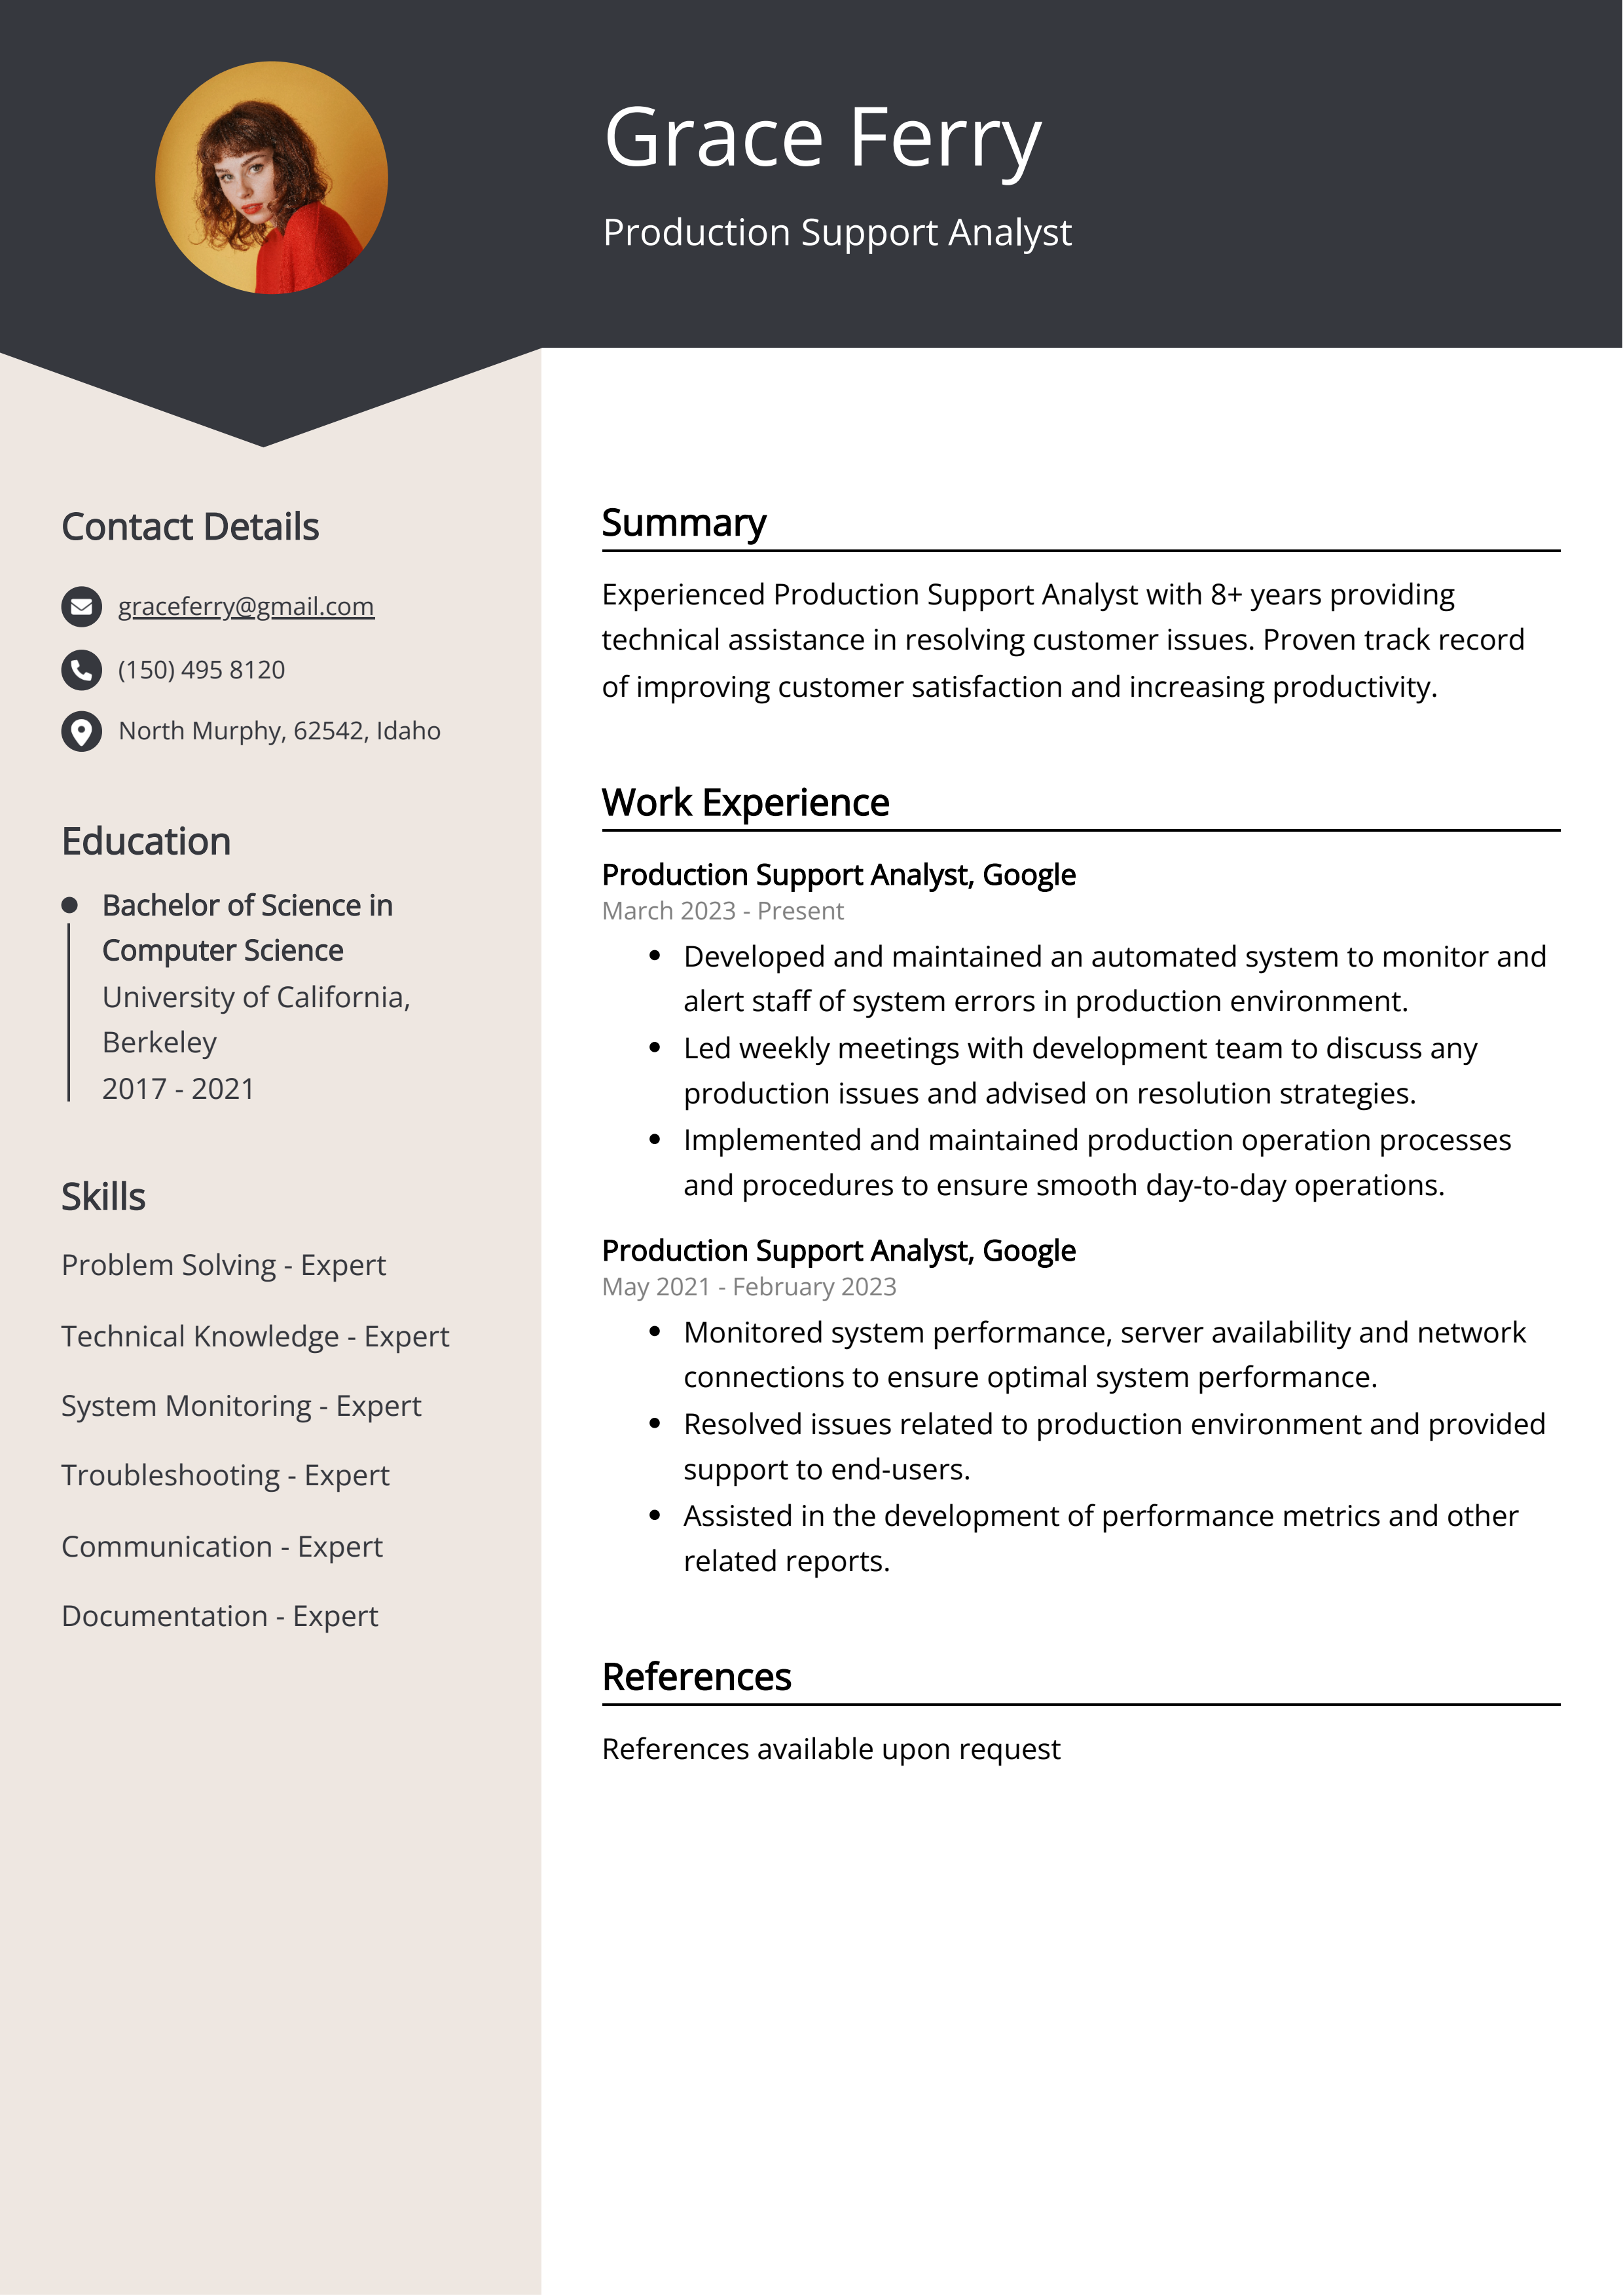 Production Support Analyst CV Example